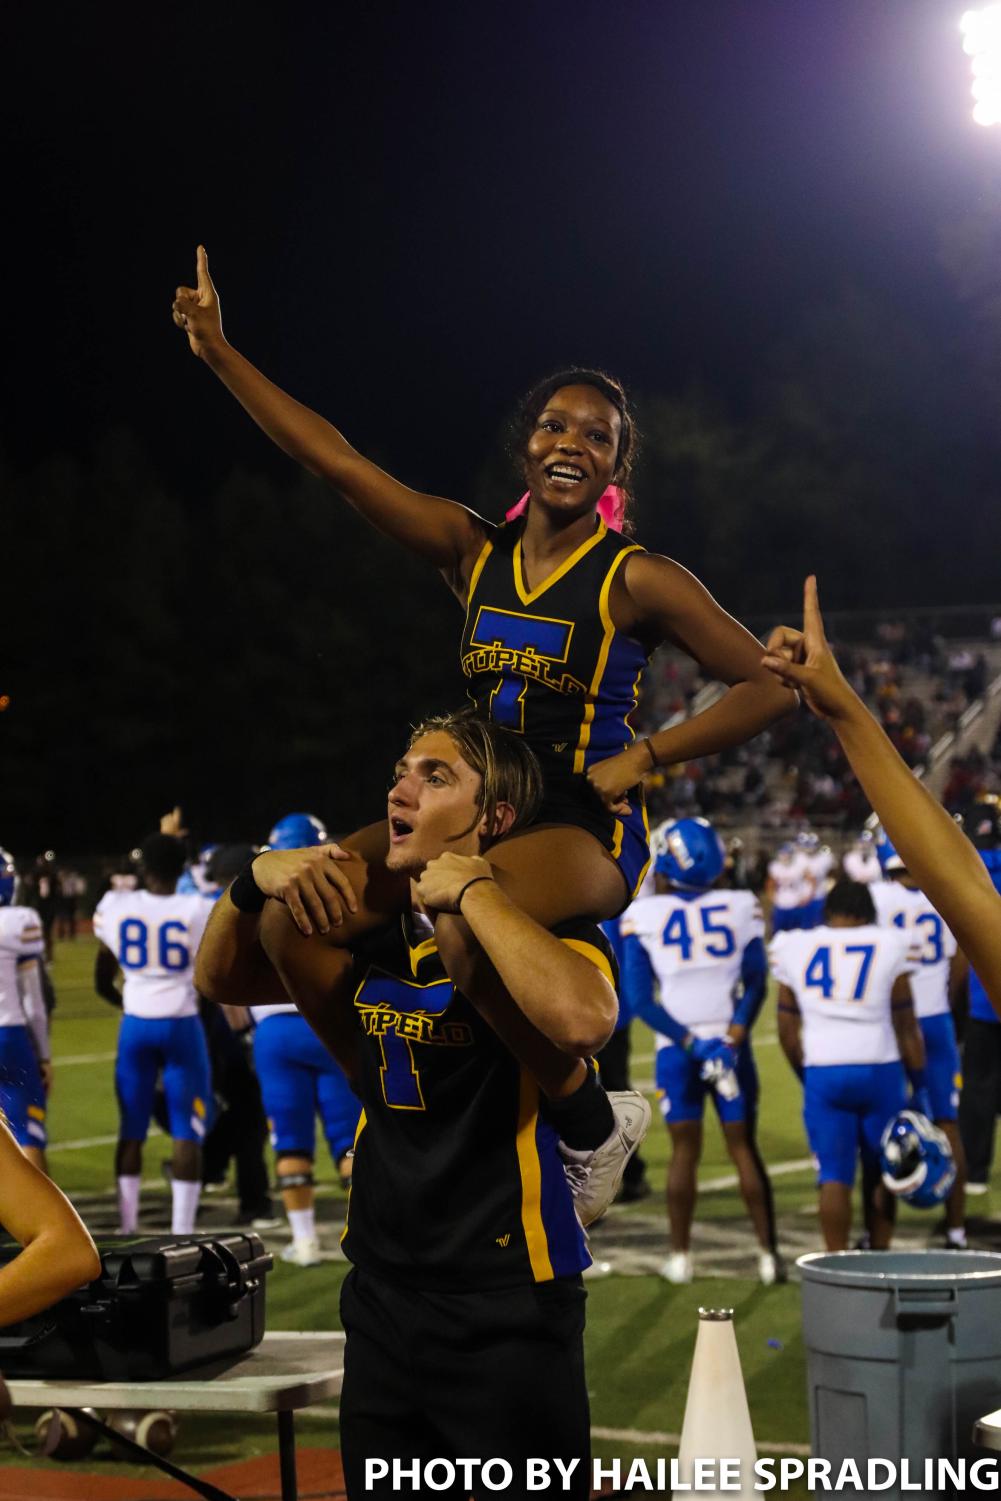 Tupelo+Remains+Undefeated+After+Their+Win+Against+Starkville